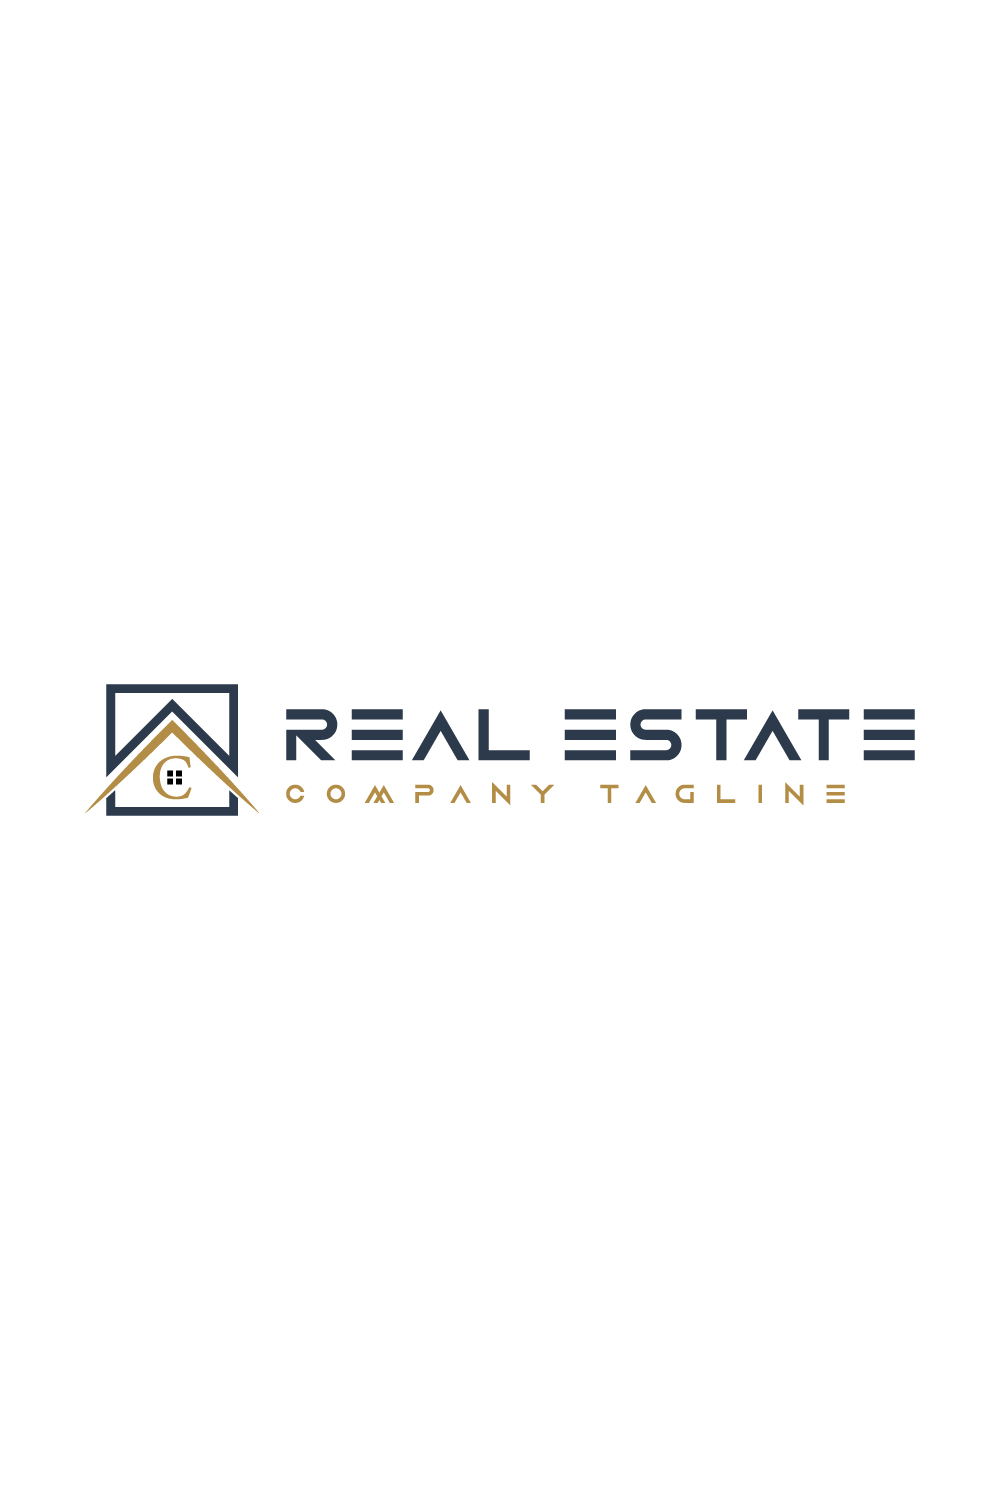 Real estate logo with golden, dark blue color and letter c pinterest preview image.